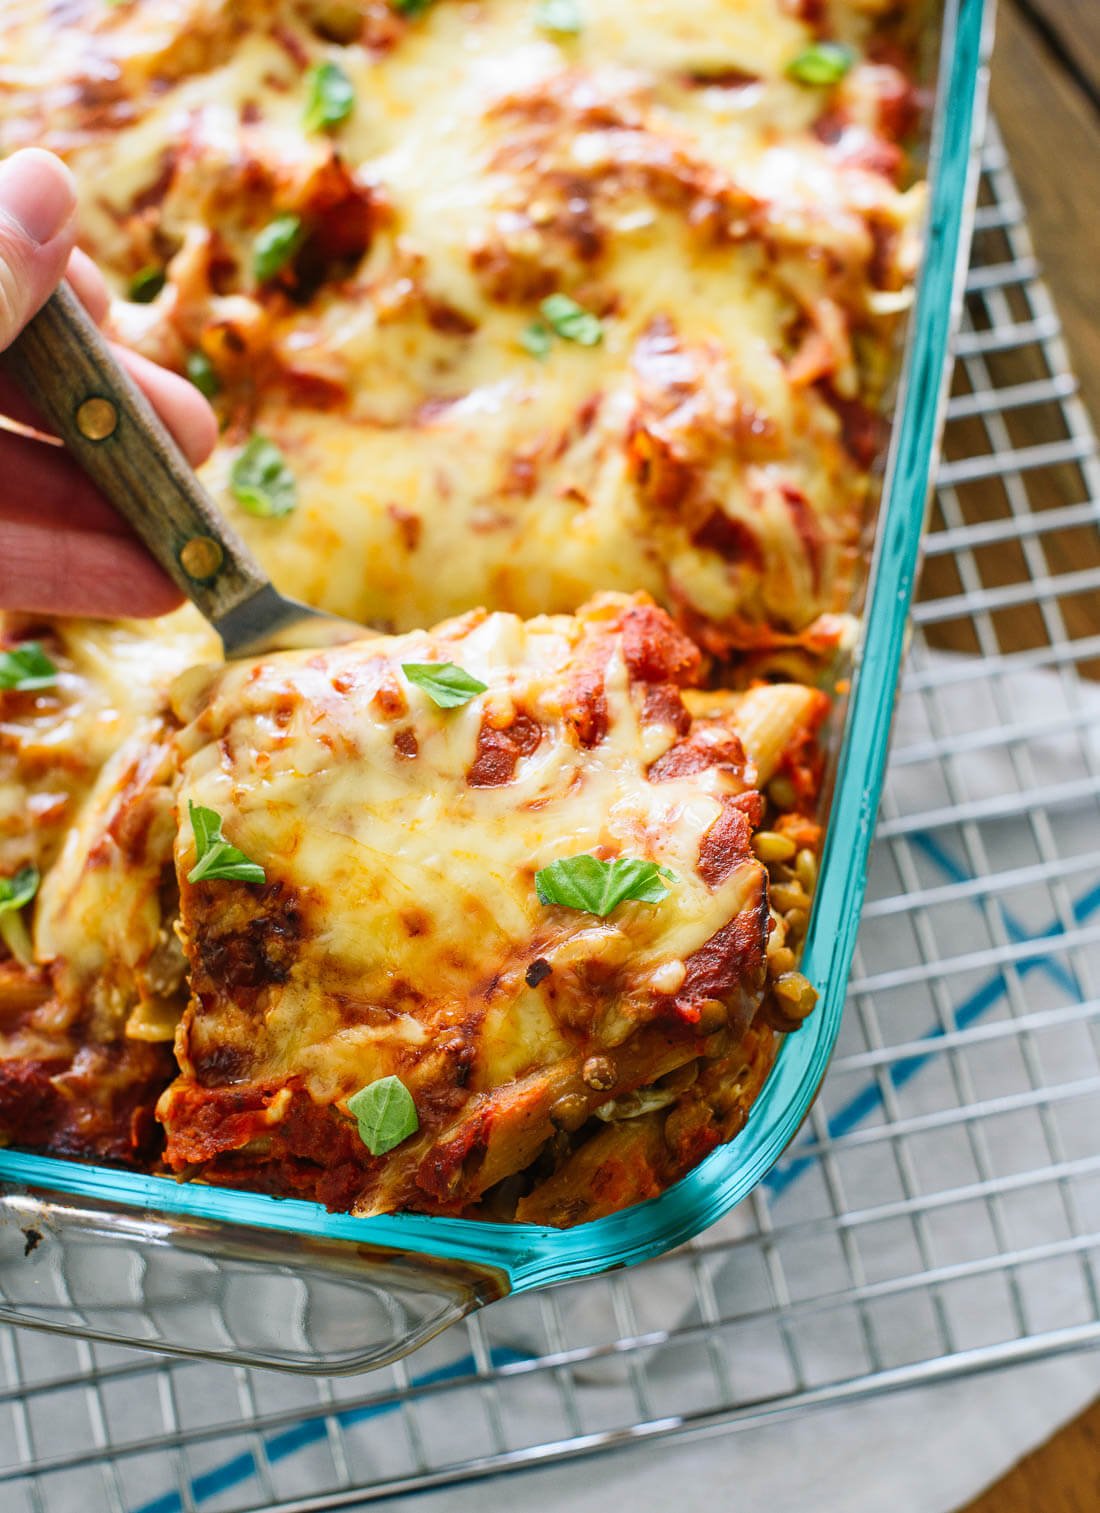 The best baked ziti recipe, with lentils for protein! cookieandkate.com